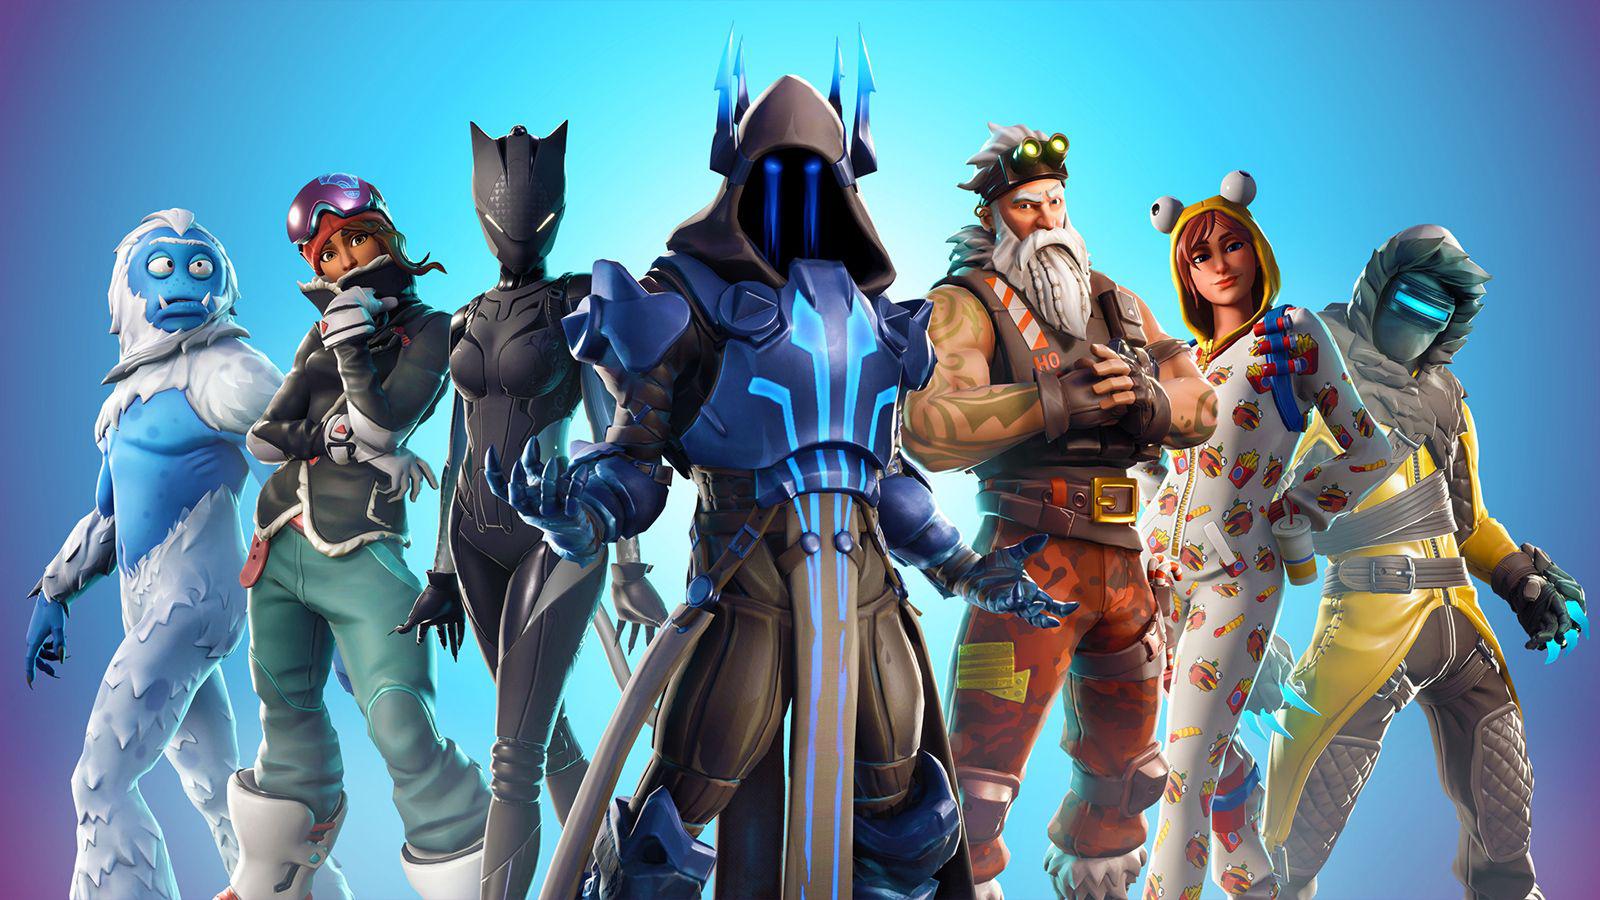 Here Are All The New Season 7 Battle Pass Skins In 'Fortnite: Battle Royale'